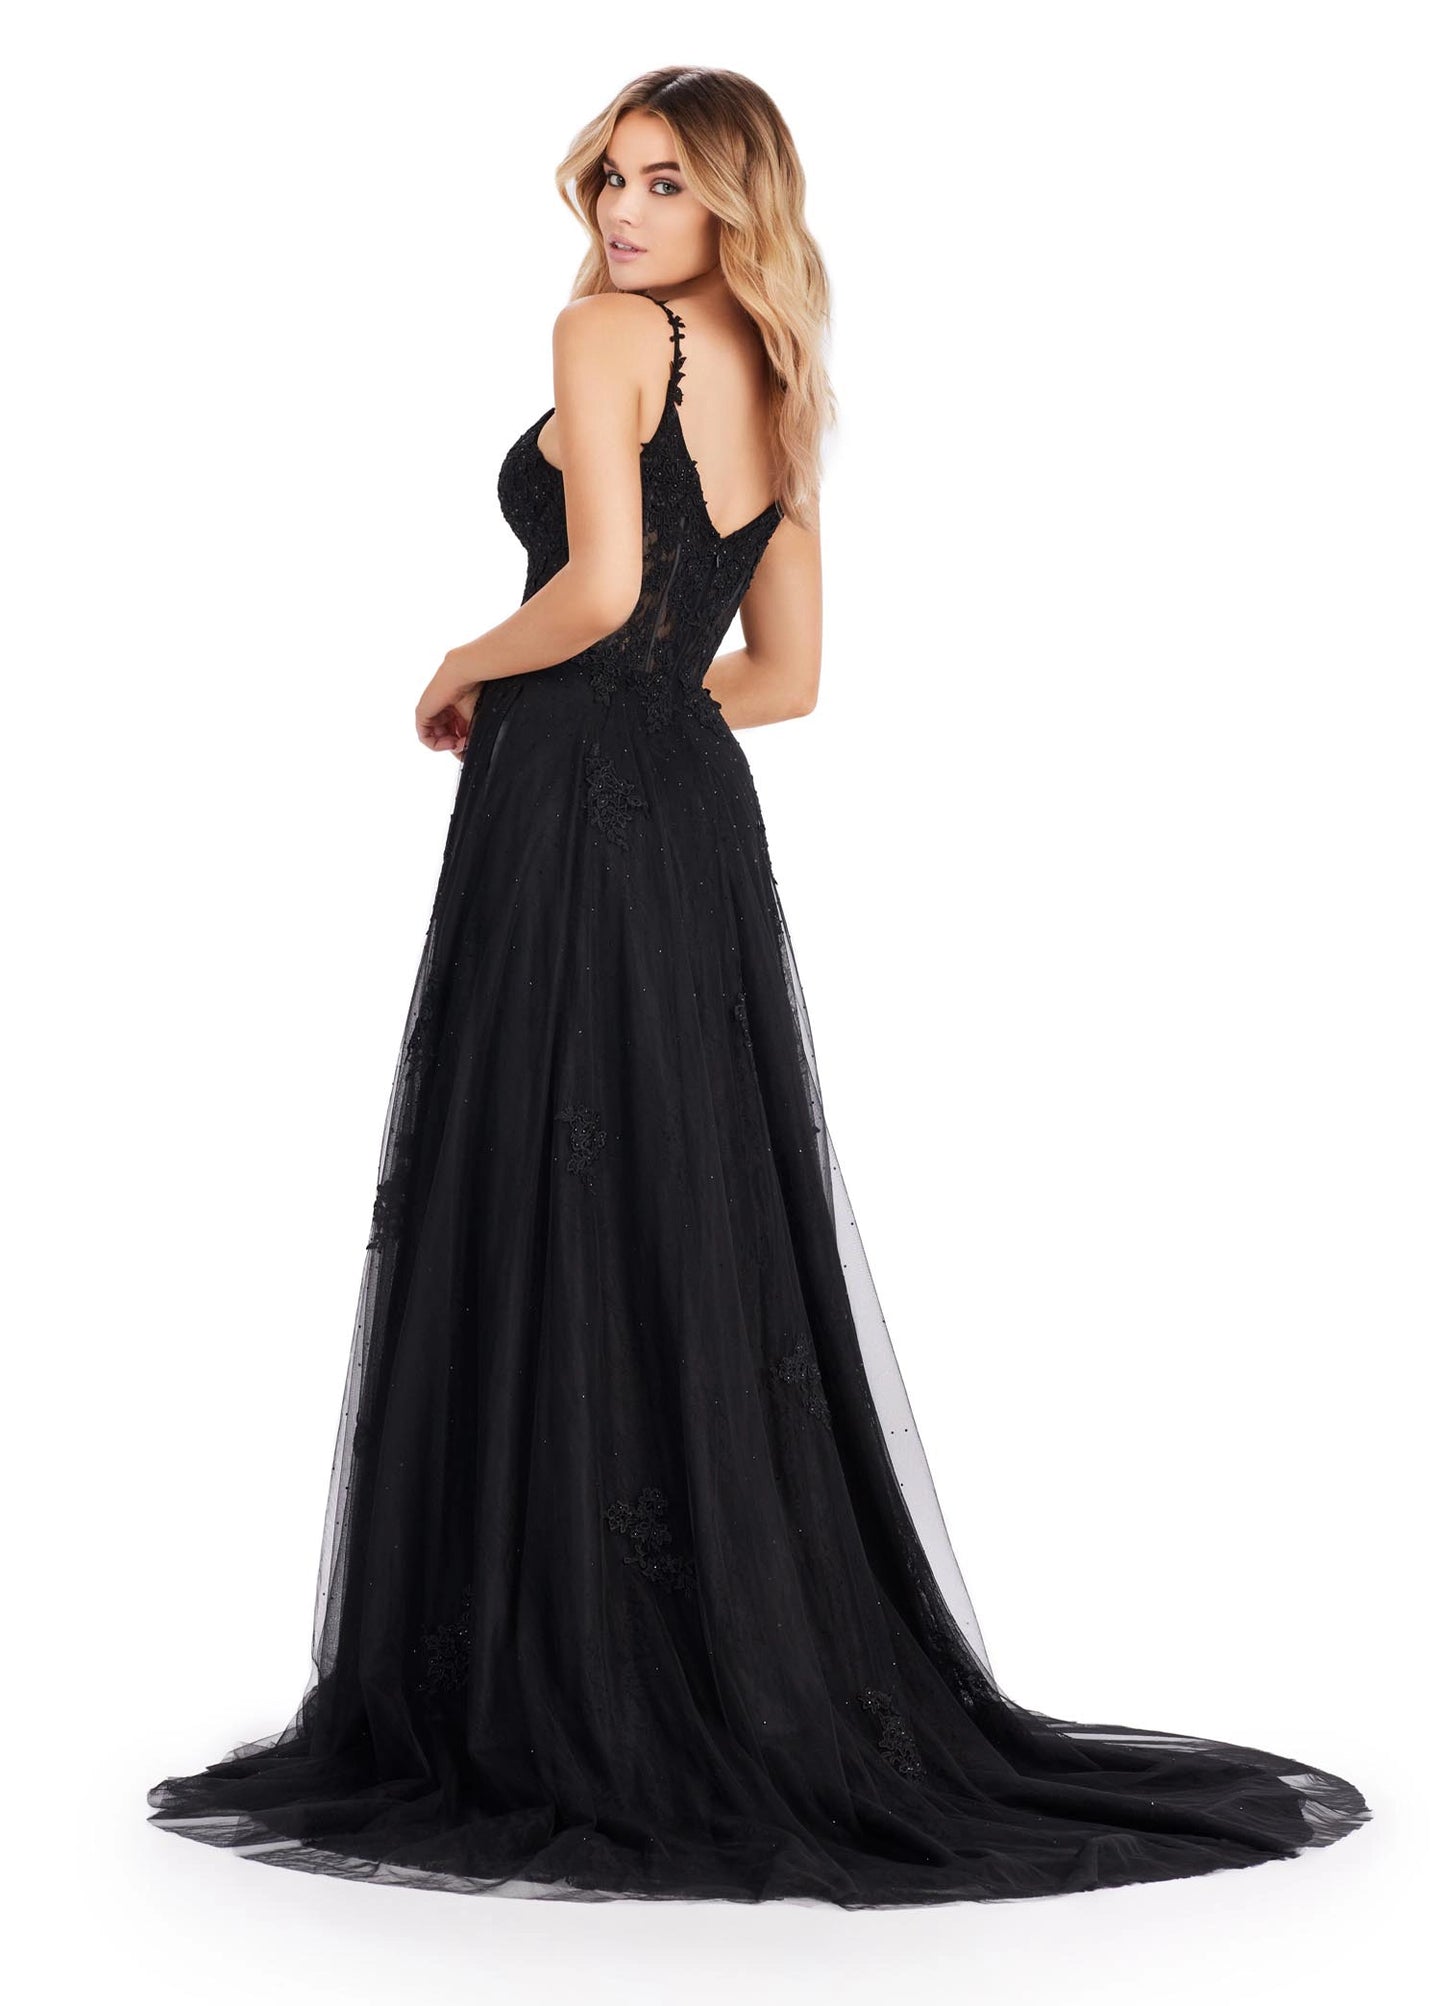 The Ashley Lauren 11558 Dress offers the perfect look for any special occasion. Crafted from a luxurious lace sheer fabric, this prom dress features a corset bodice, maxi slit A-line skirt, and pageant train - all in one stunning formal gown. Delight in the timeless style of this timeless piece. 